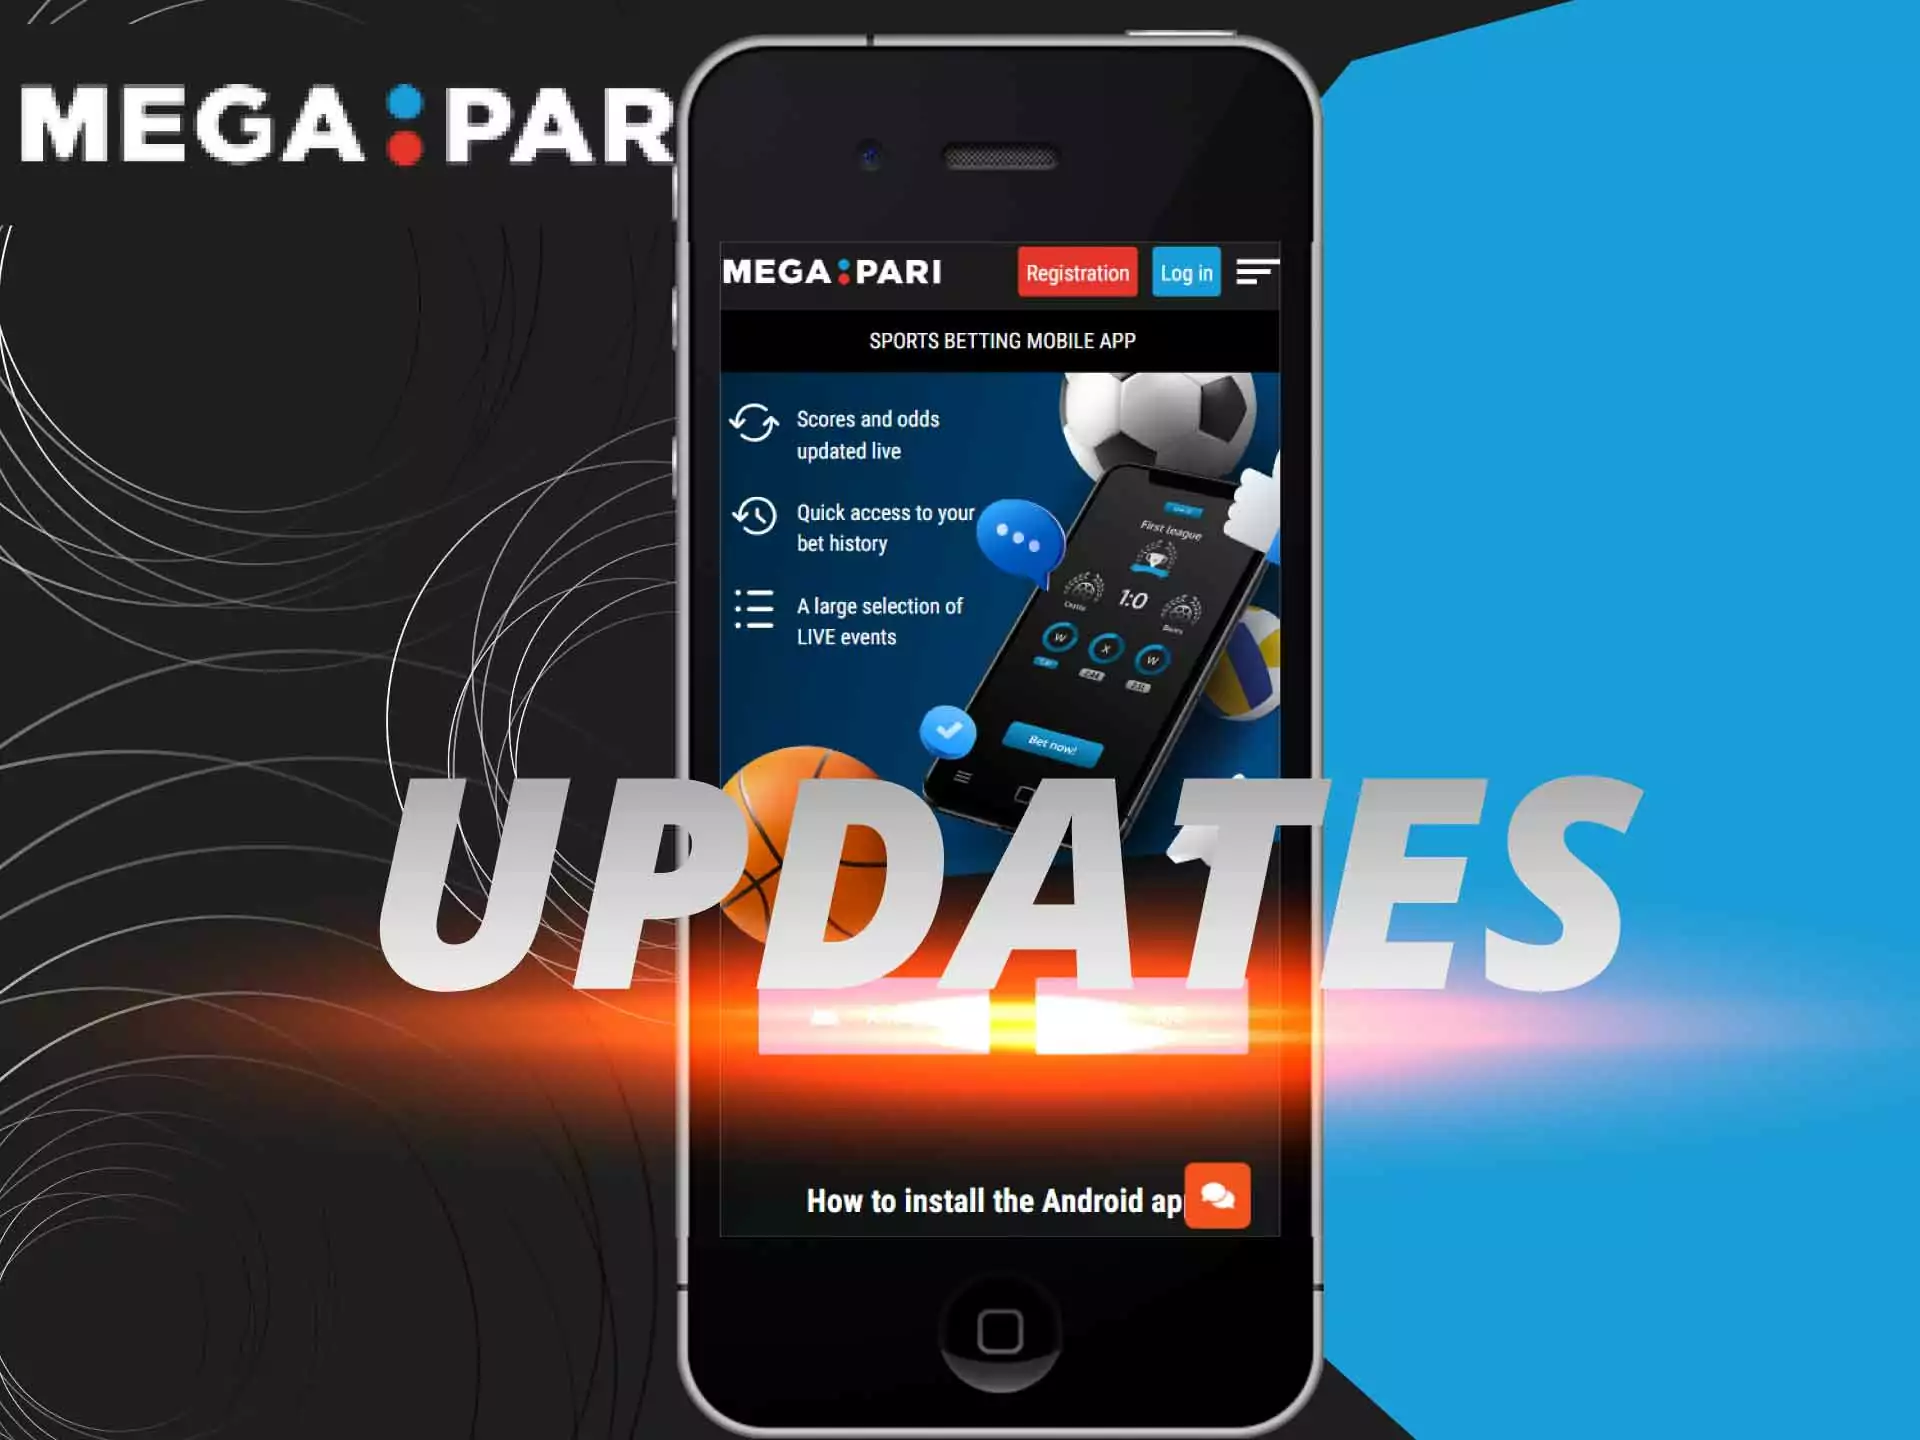 Download the actual version of the app from the MegaPari website to keep the app updated.